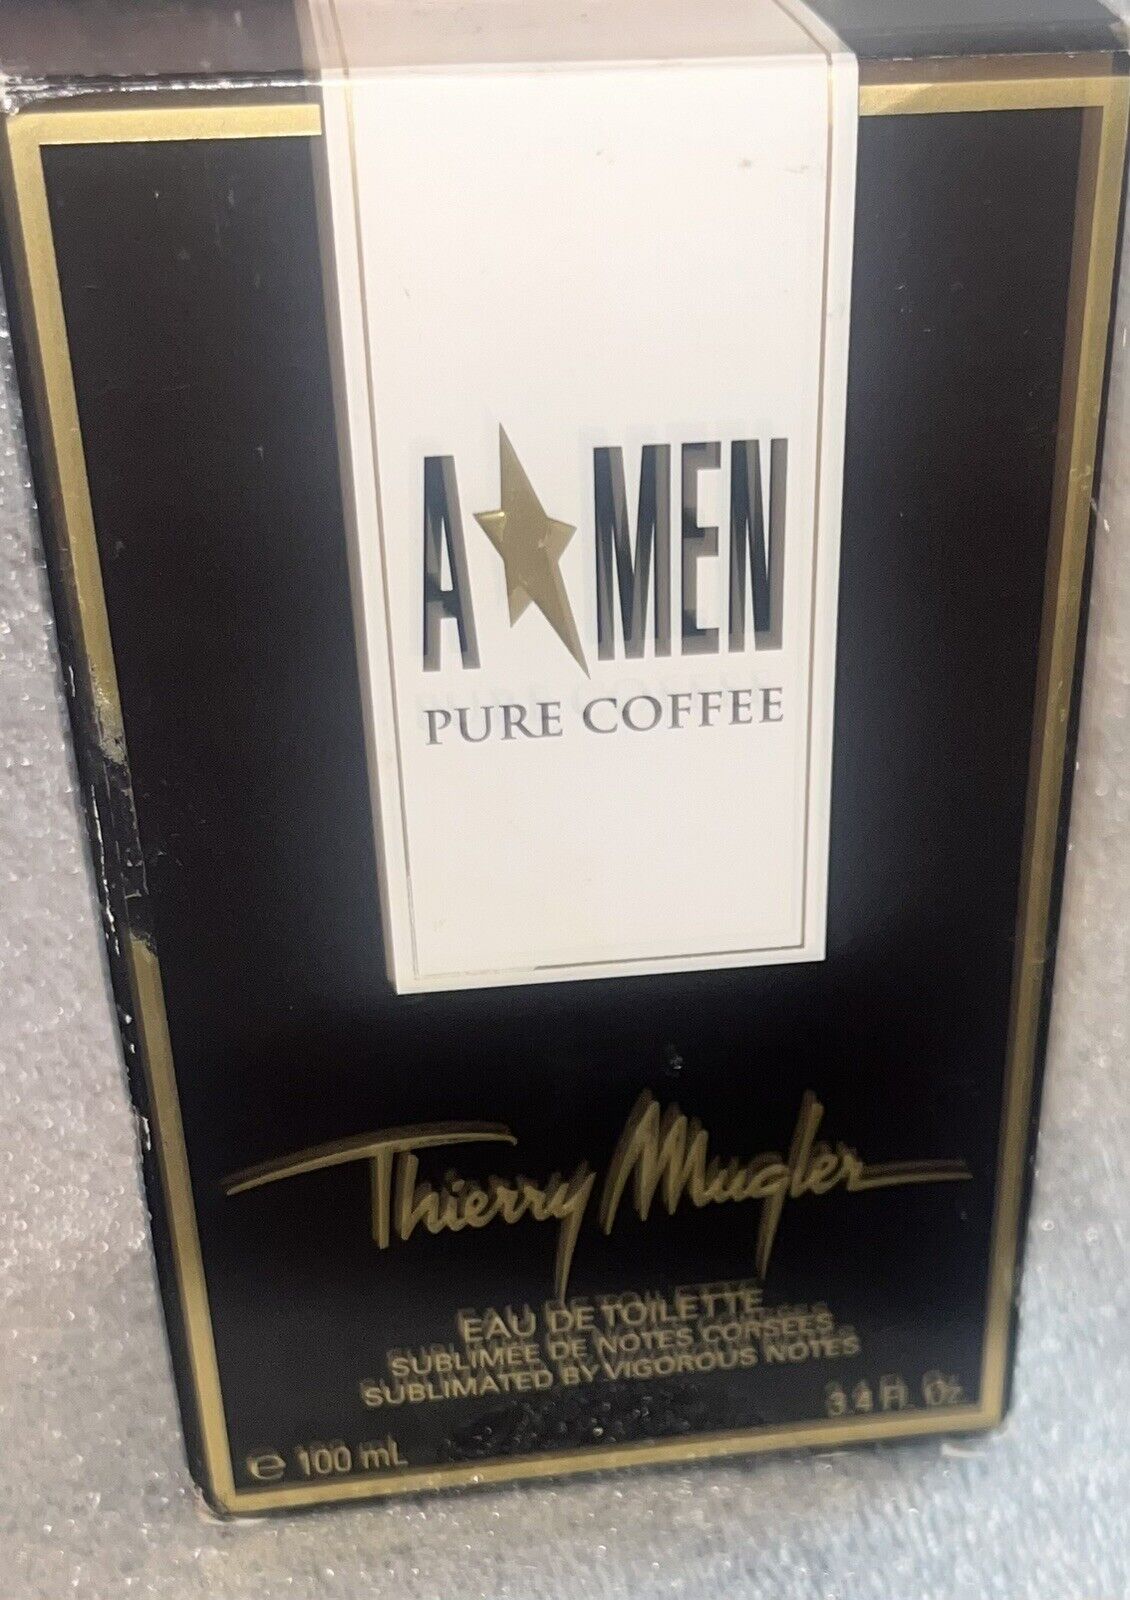 Thierry Mugler A*Men PURE COFFEE 2015 EDT 100ml/3.4 oz DISCONTINUED